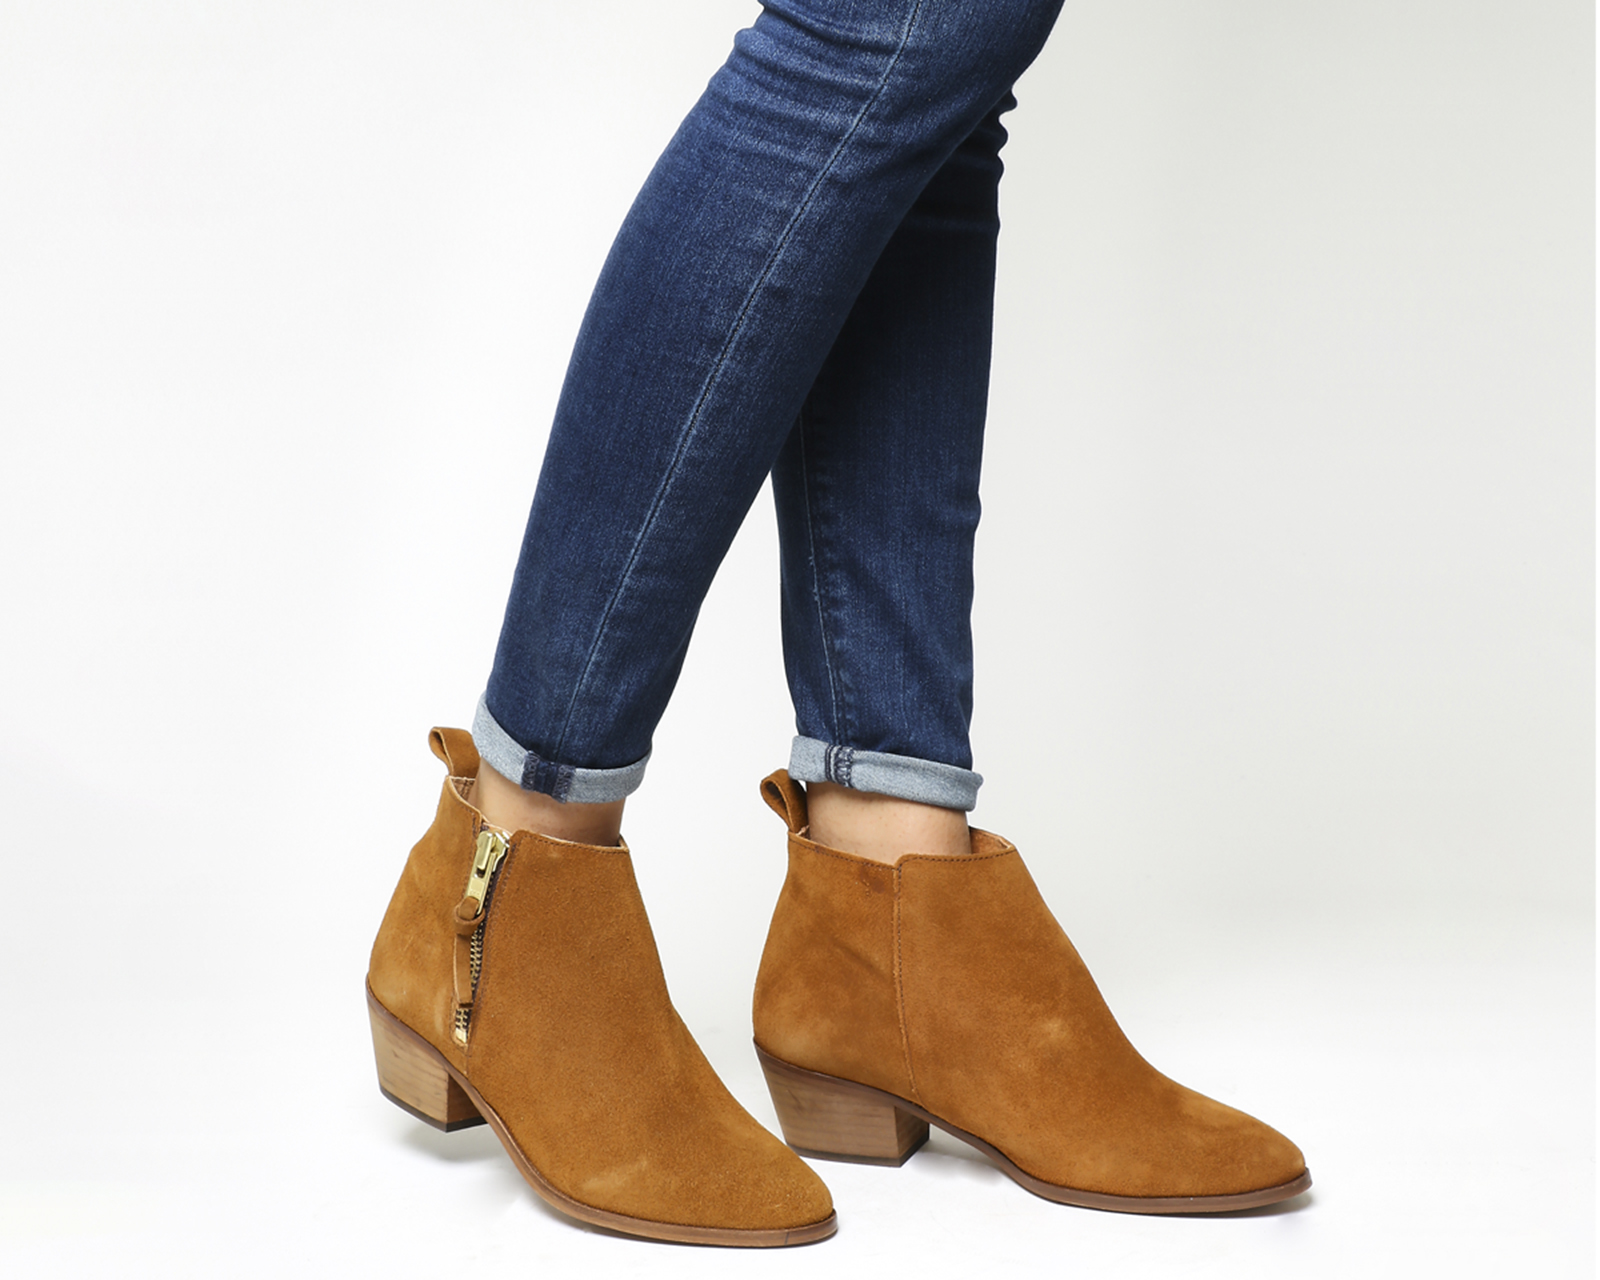 OFFICEImposter Side Zip Ankle BootsTan Suede